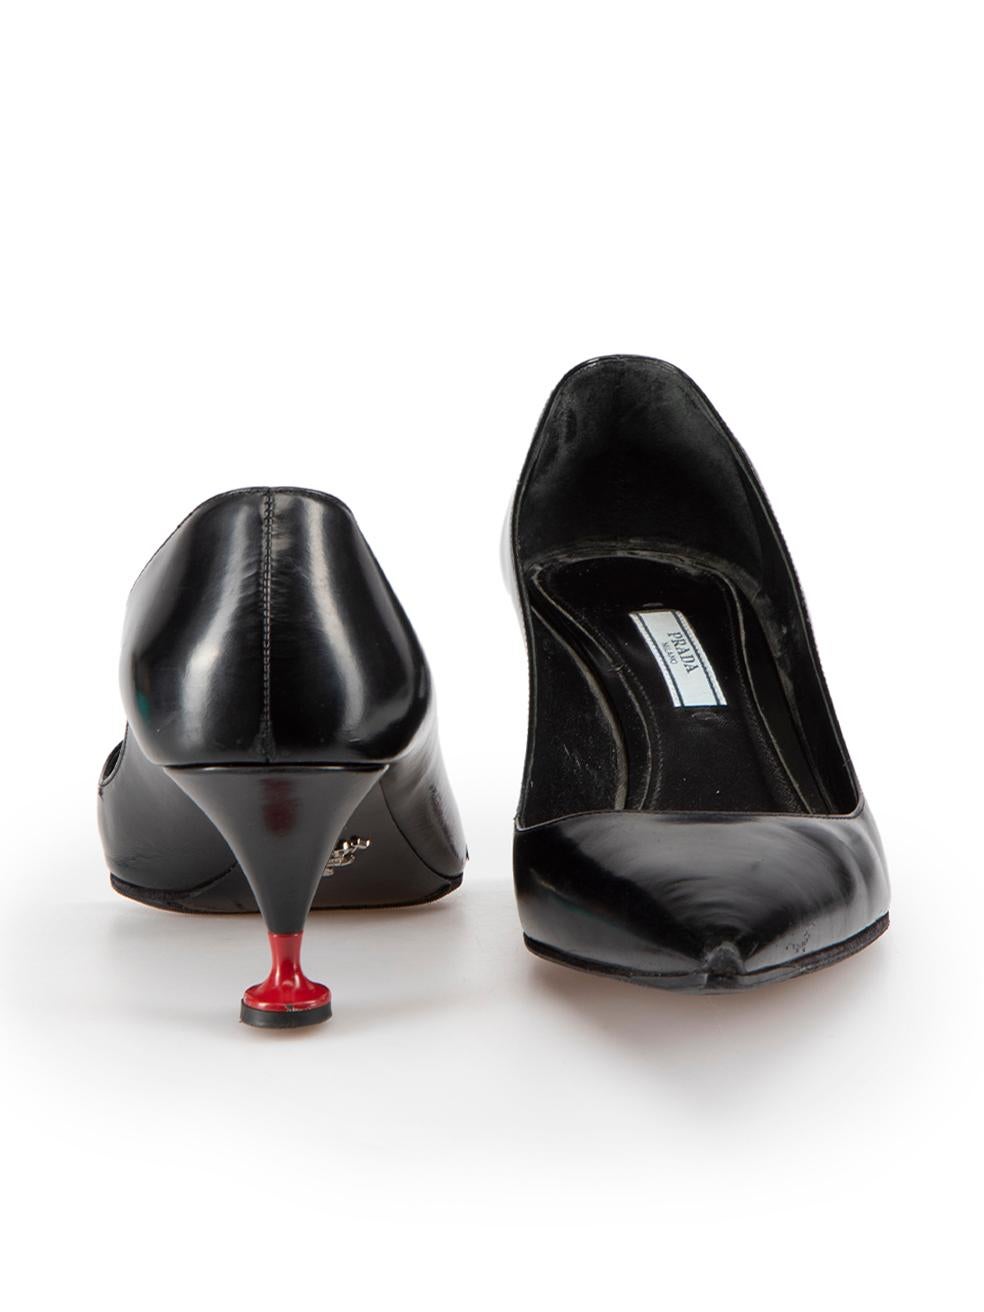 Prada Black Leather Point Toe Court Shoes Size IT 40.5 In Good Condition For Sale In London, GB